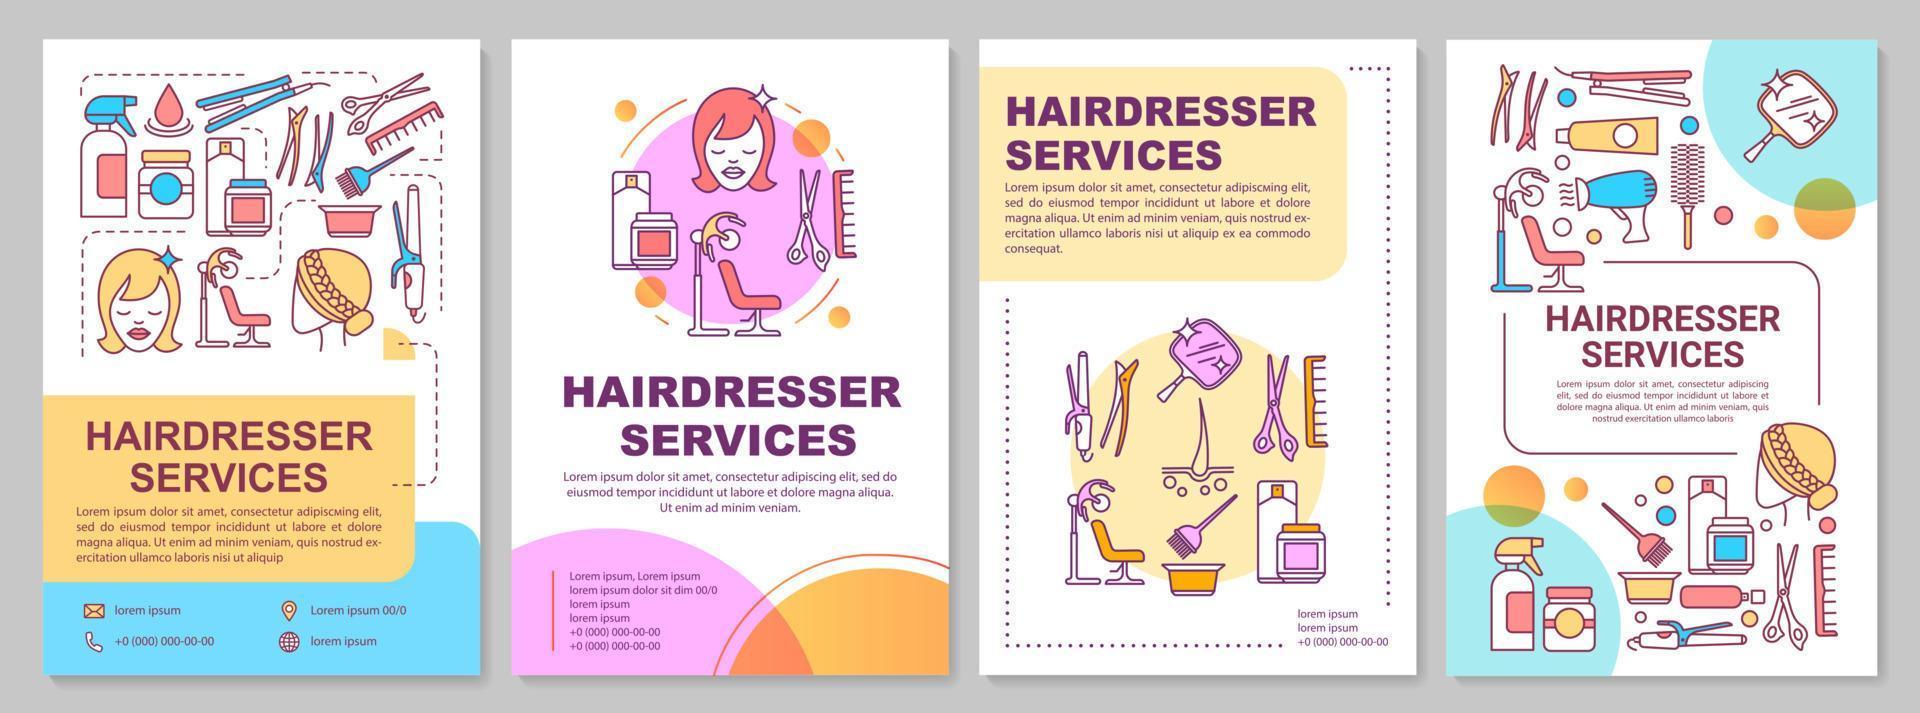 Hairdresser services brochure template layout. Hairdressing salon flyer, booklet, leaflet print design with linear illustrations. Vector page layouts for magazines, annual reports, advertising posters